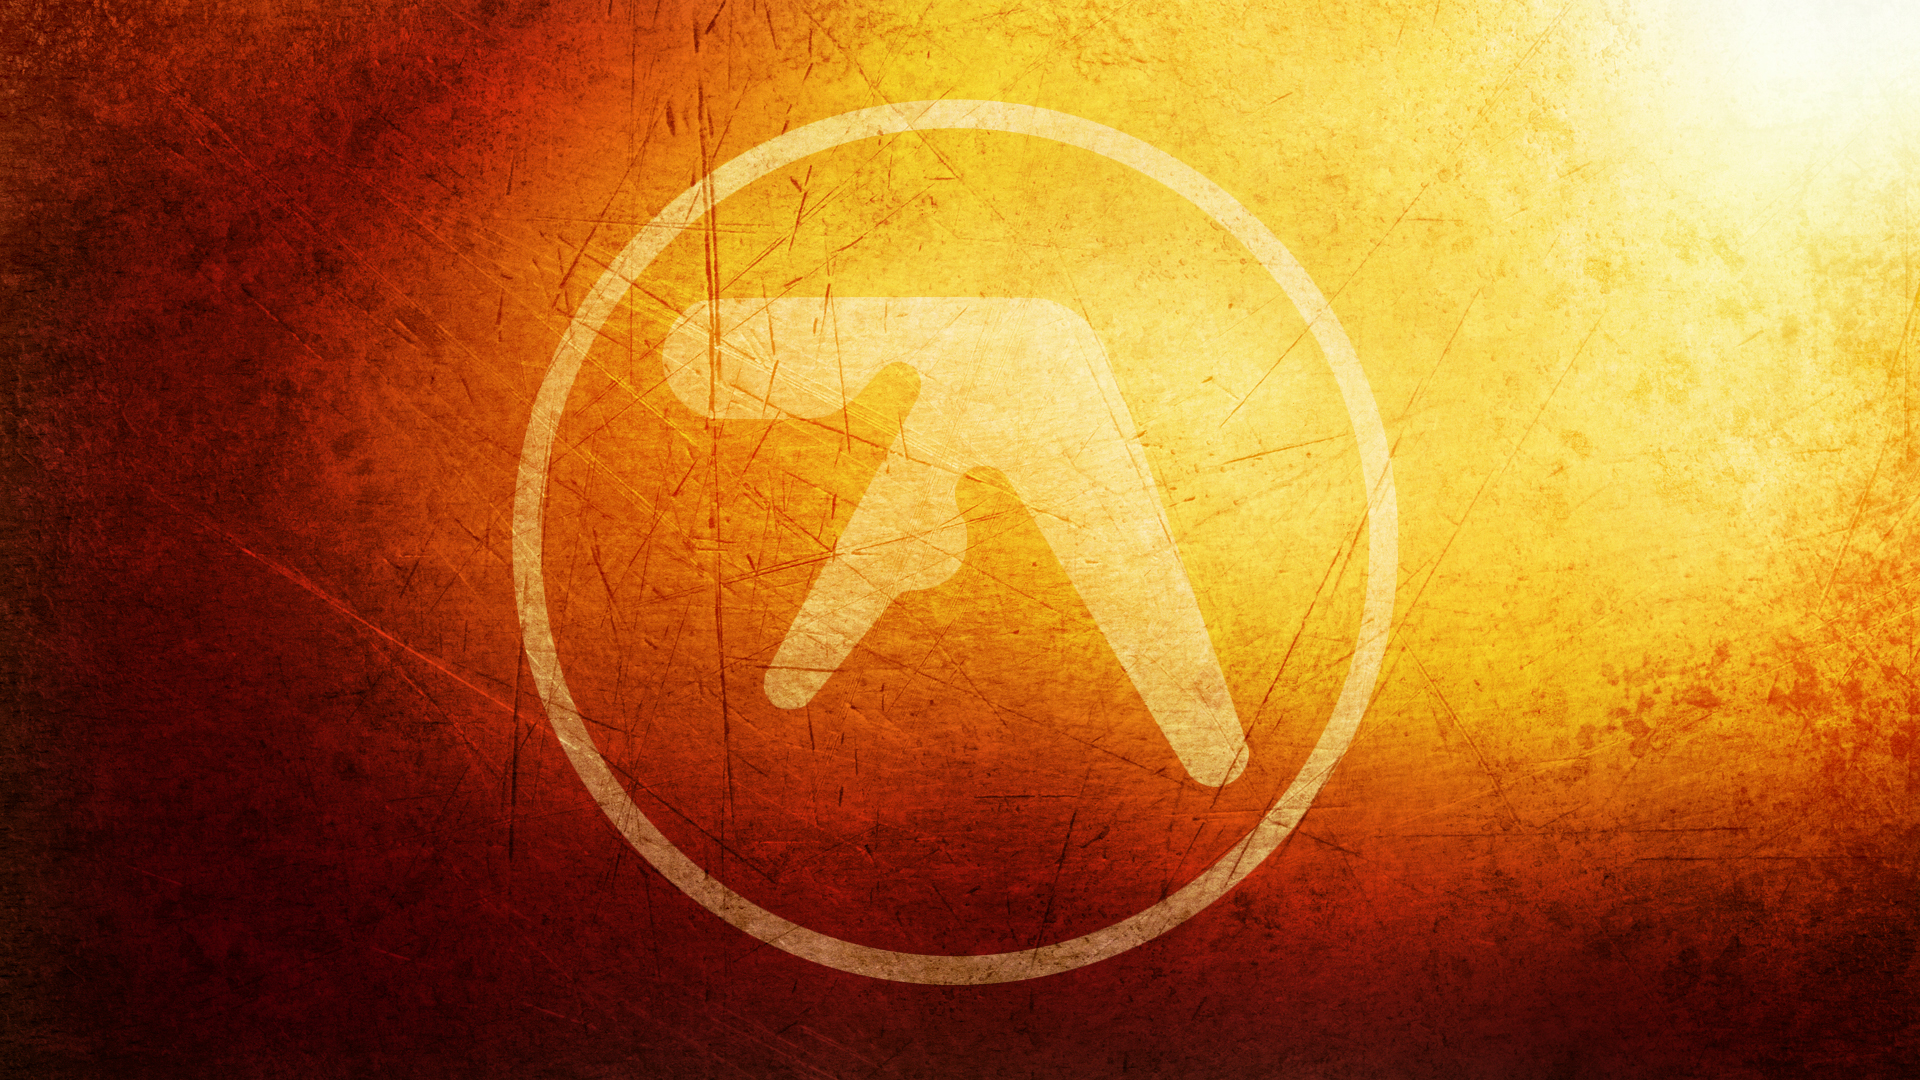 Any cool Aphex Twin wallpapers? : aphextwin